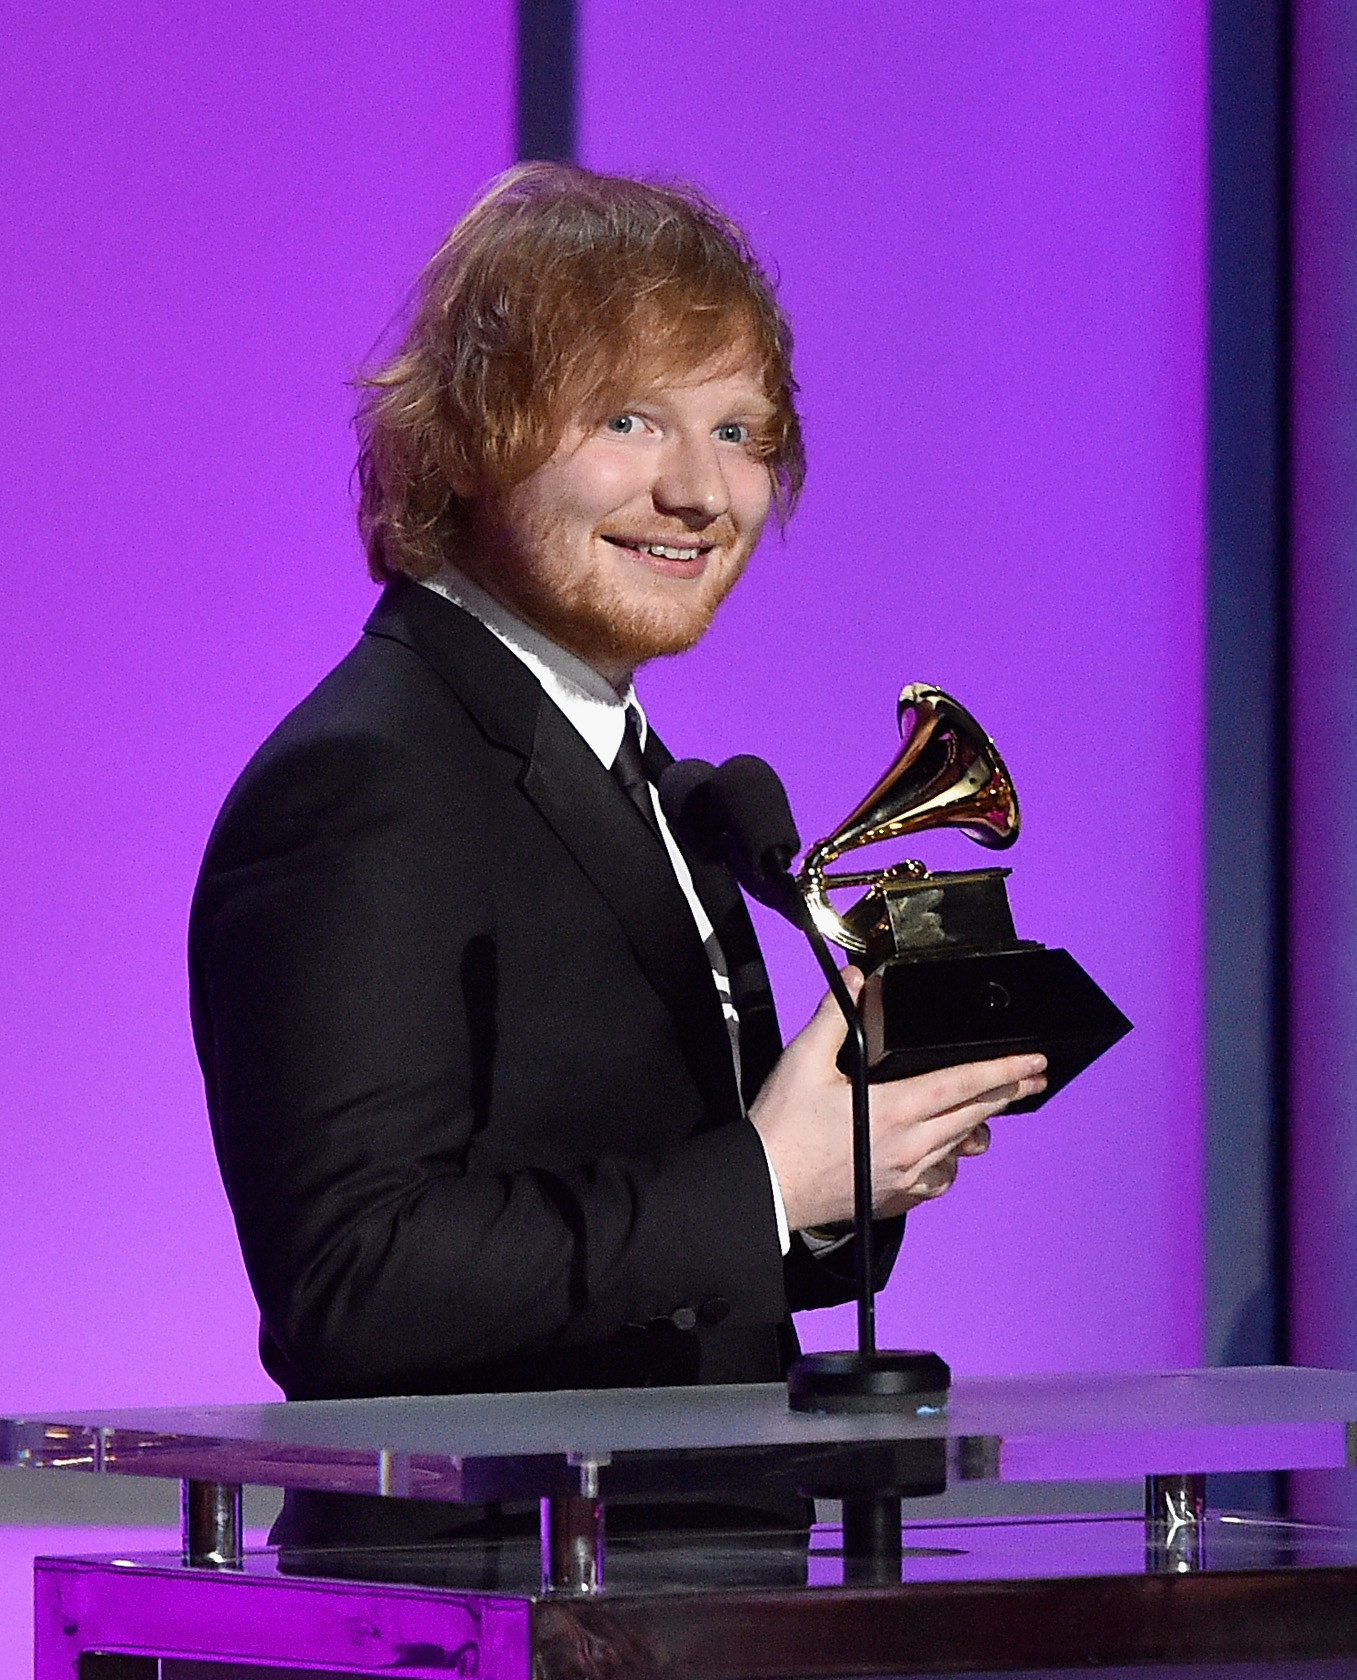 Ed onstage, smiling, and holding an award